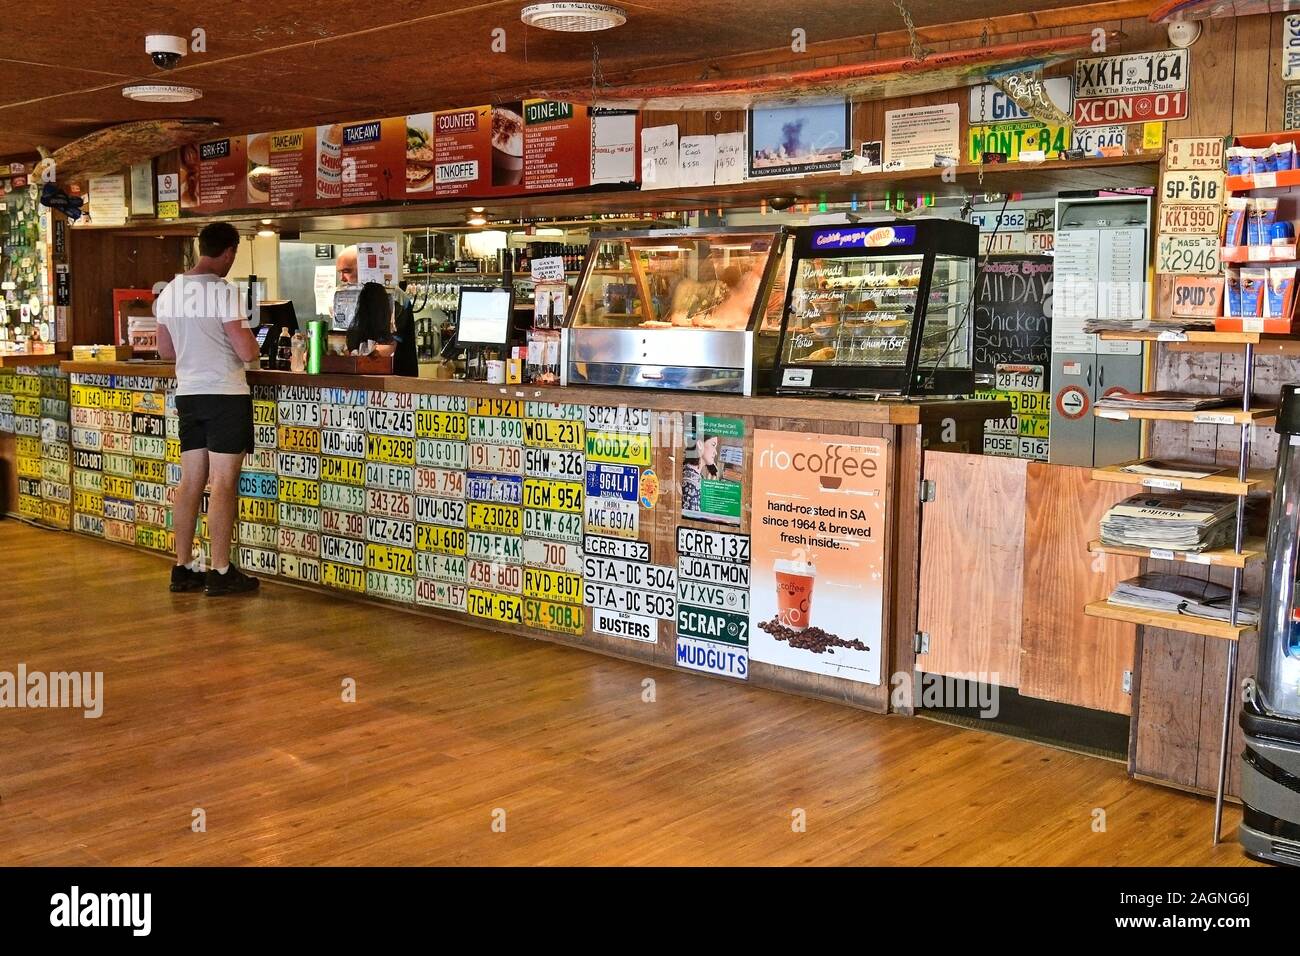 Pimba, SA, Australia - November 12, 2017: Unidentified people inside Spud's roadhouse with lot of license plates, preferred stop for food and drink on Stock Photo